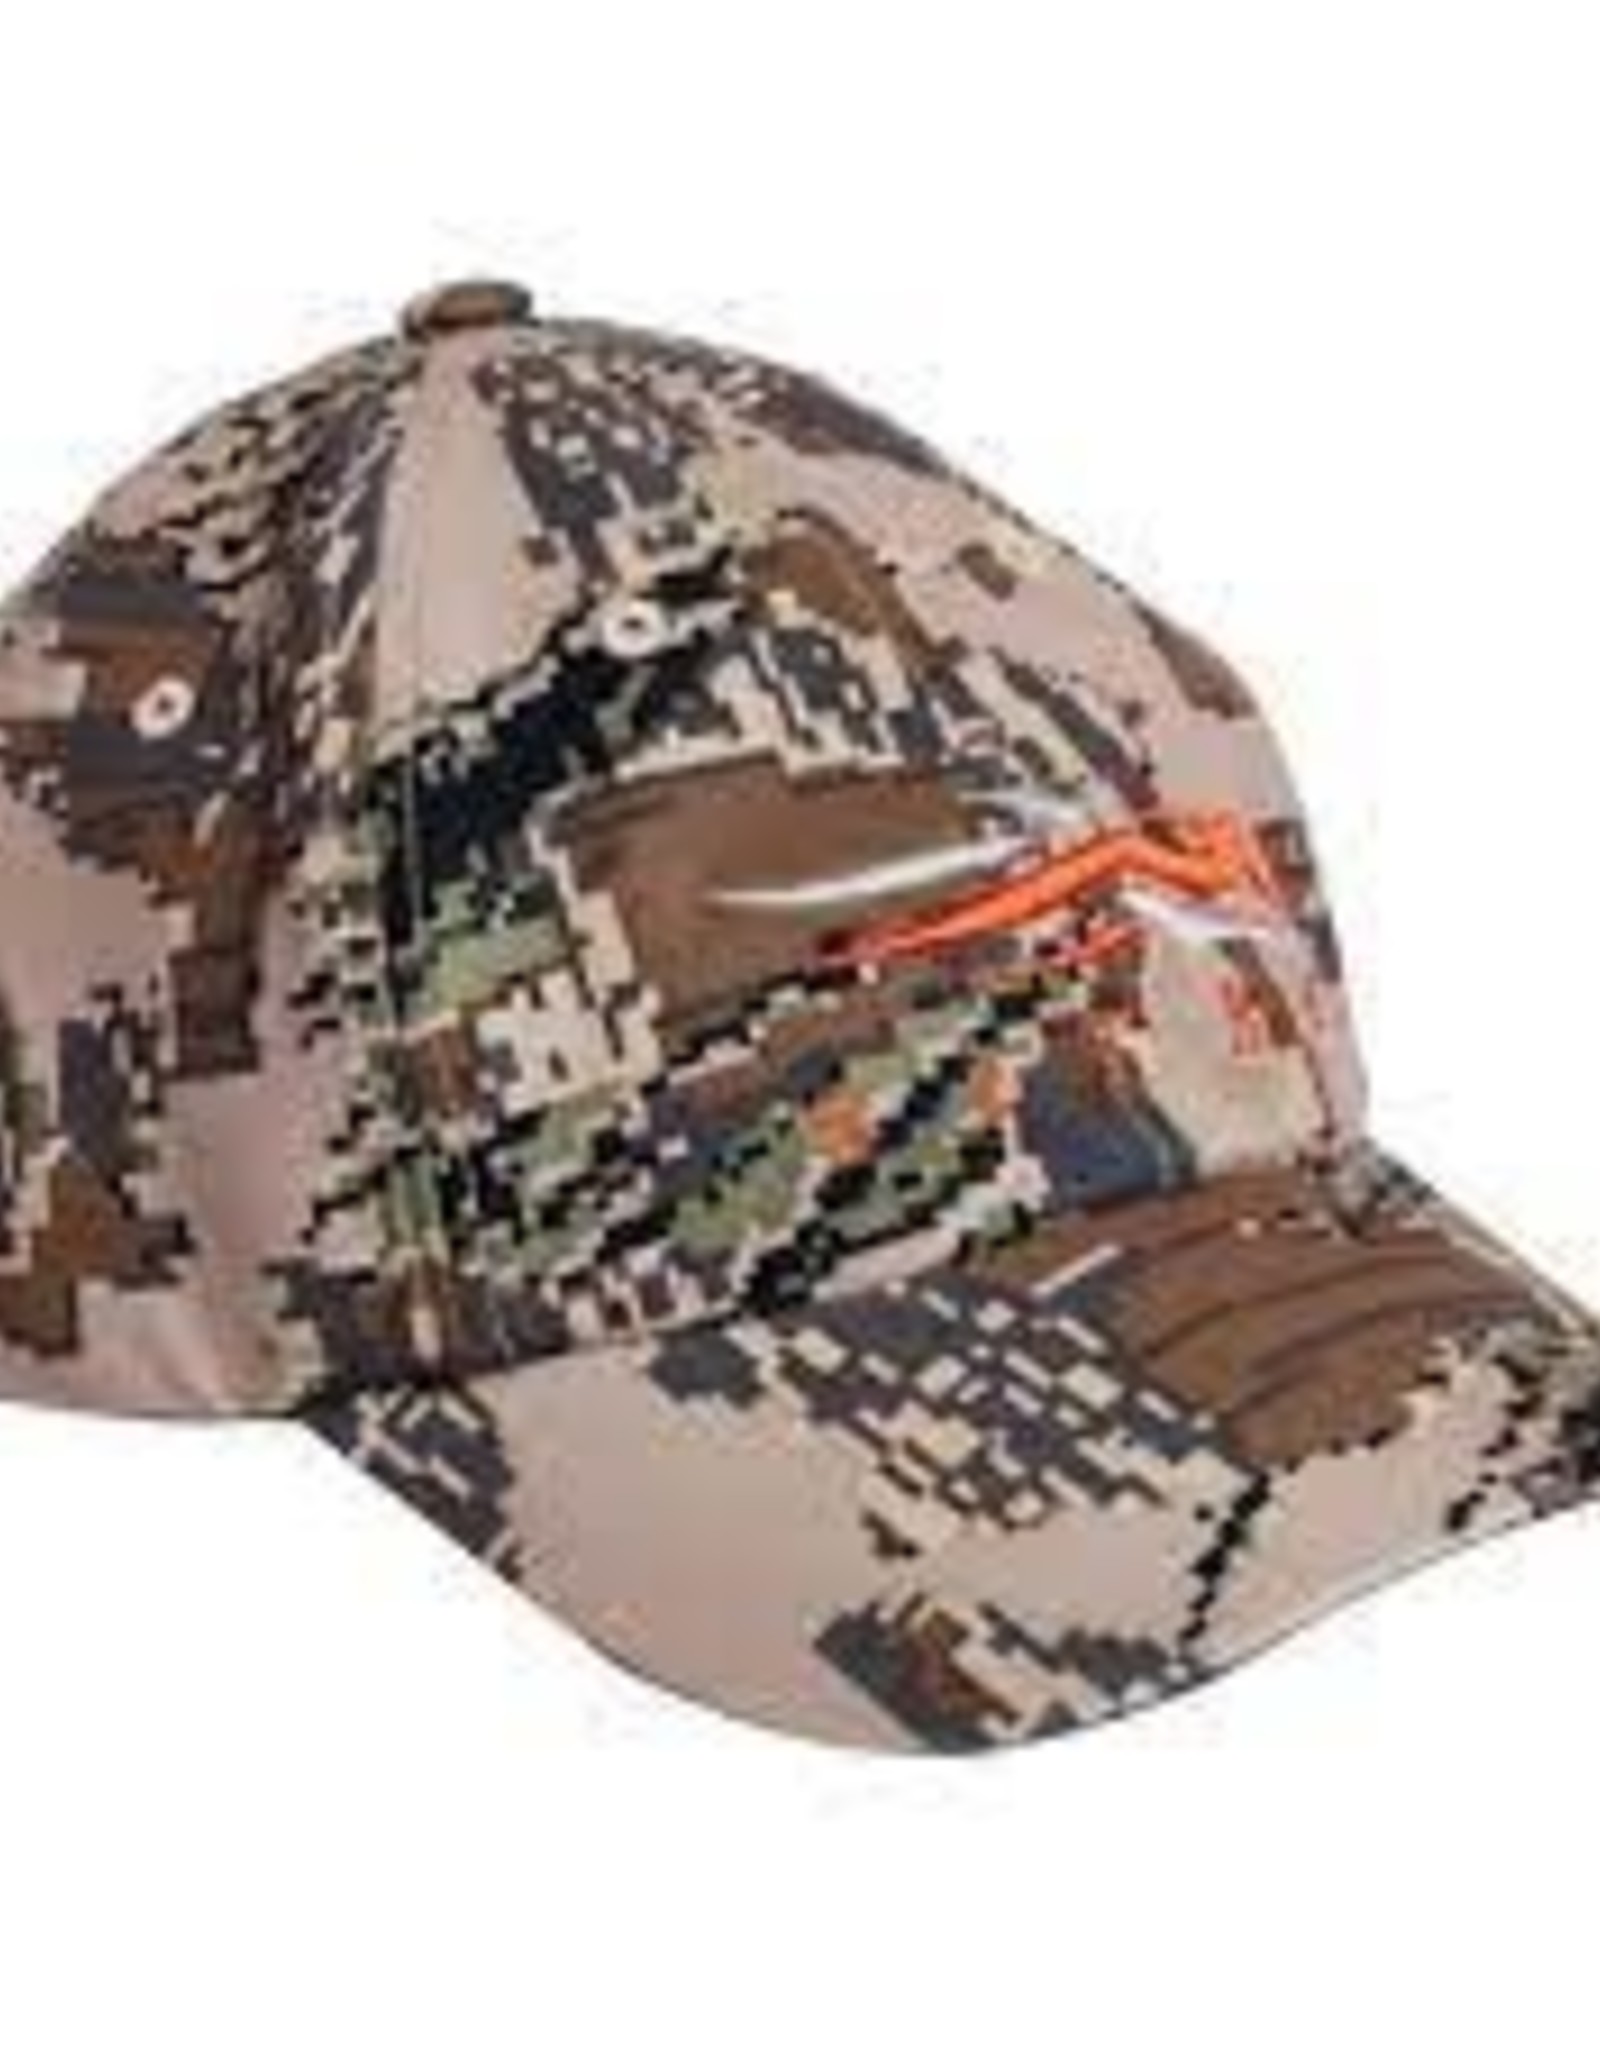 SITKA Traverse Cap Optifade Open Country One Size Fits All